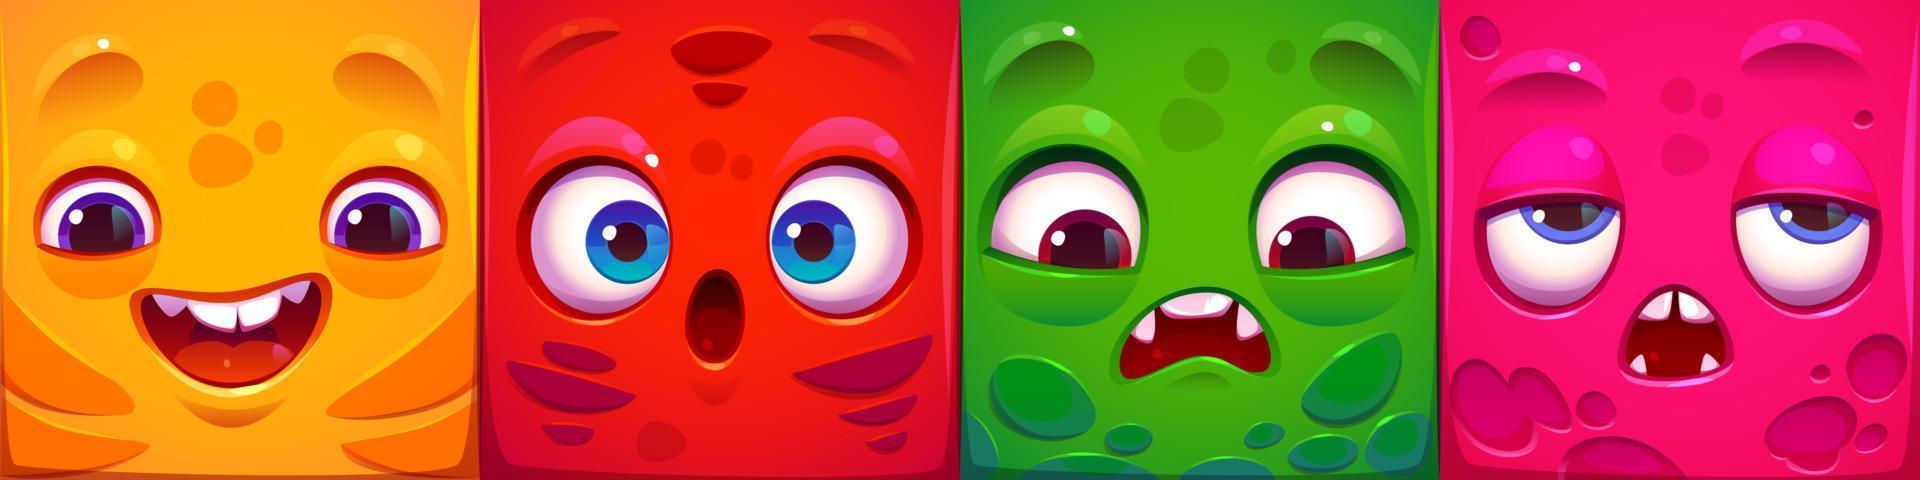 Square monster face emotion. Abstract game avatar vector